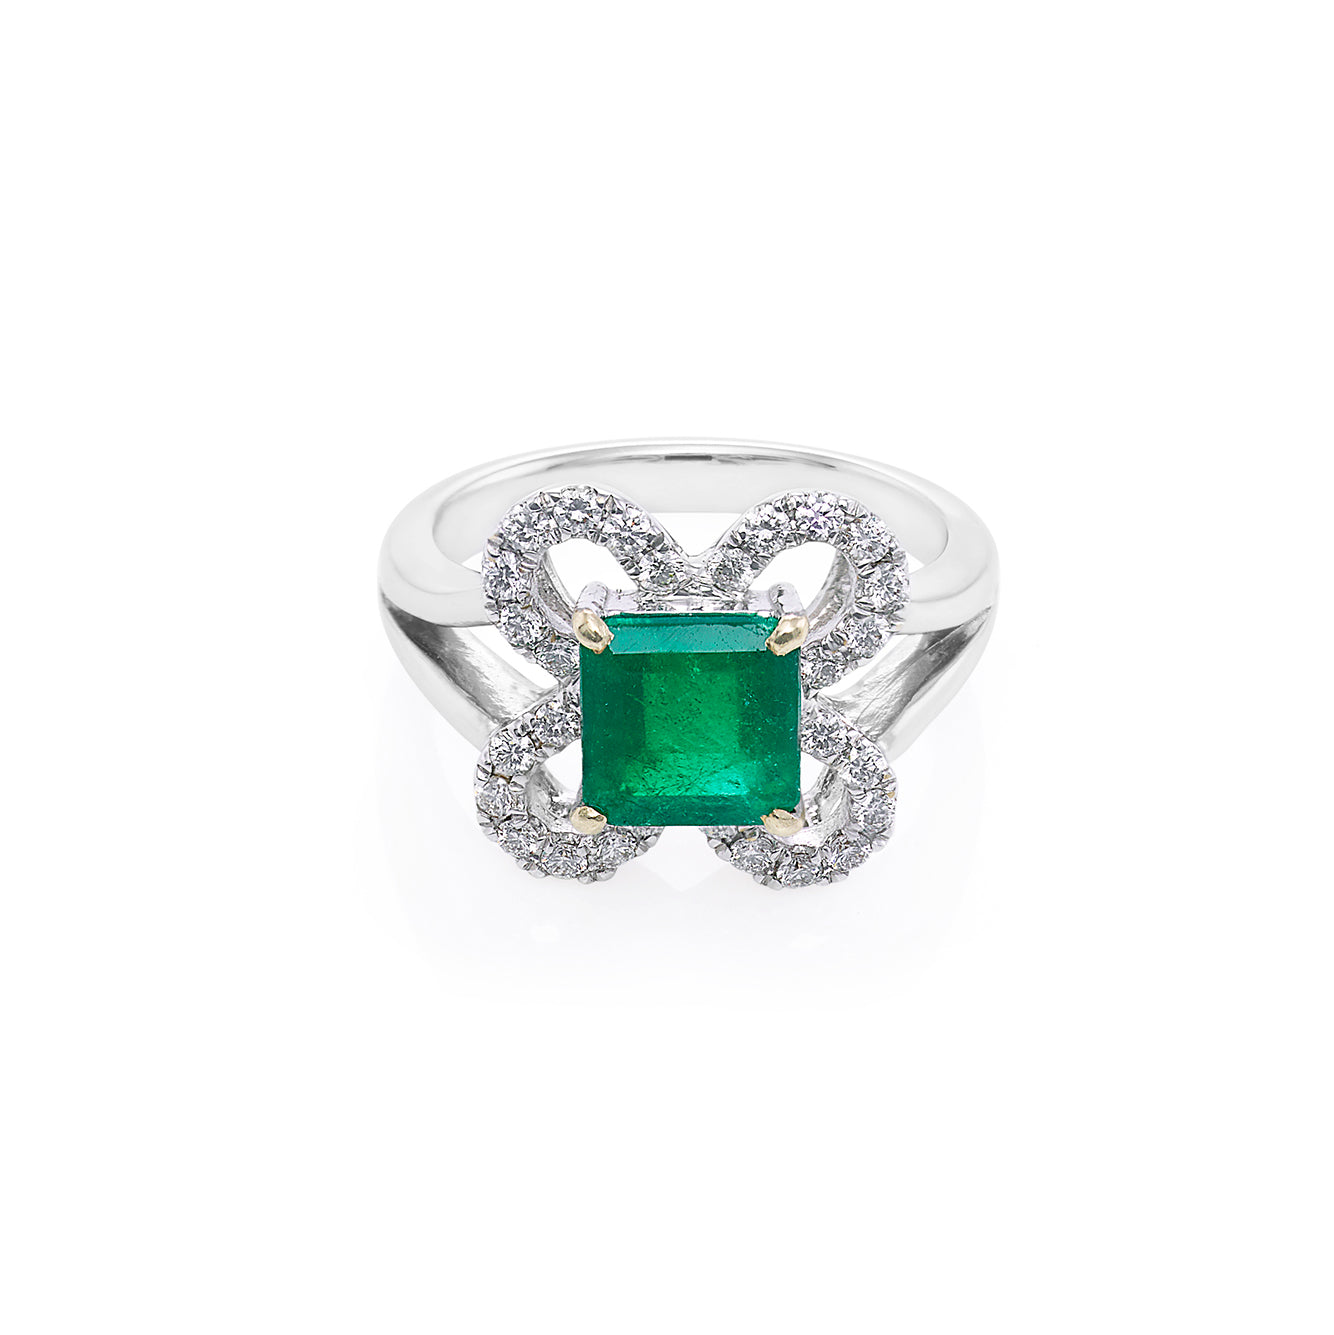 Emerald and Diamond Ring in 18K White Gold - HN JEWELRY